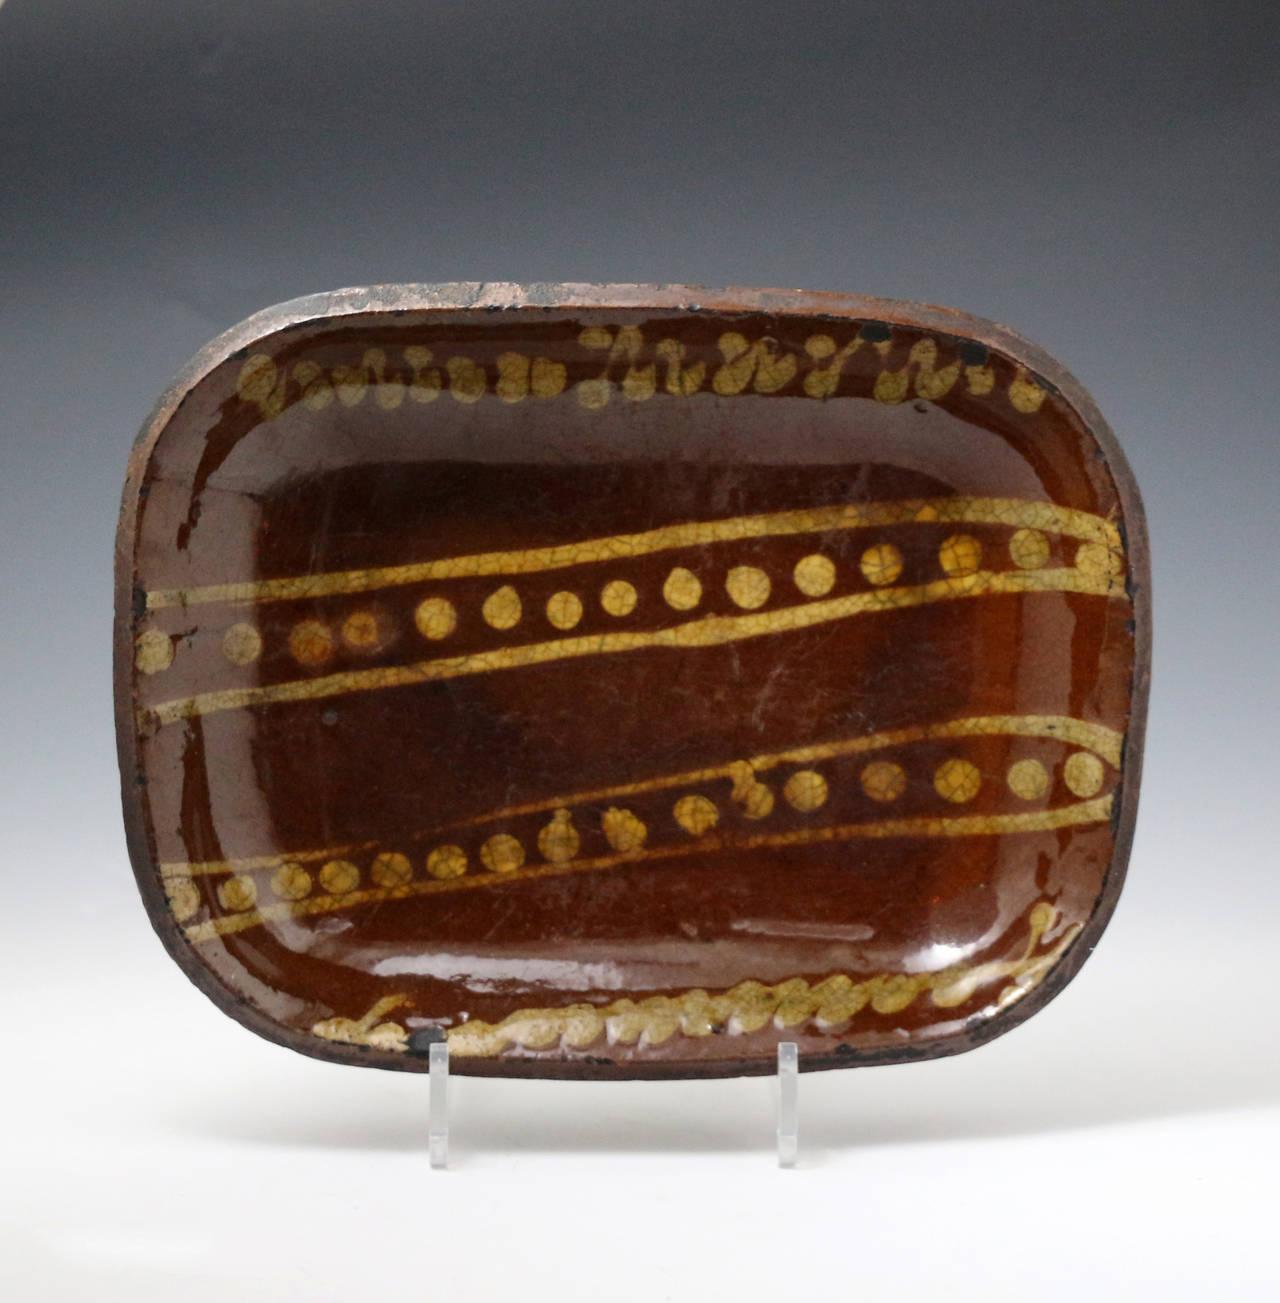 British Antique period English slipware earthenware baking or loaf dish late 18thc. For Sale